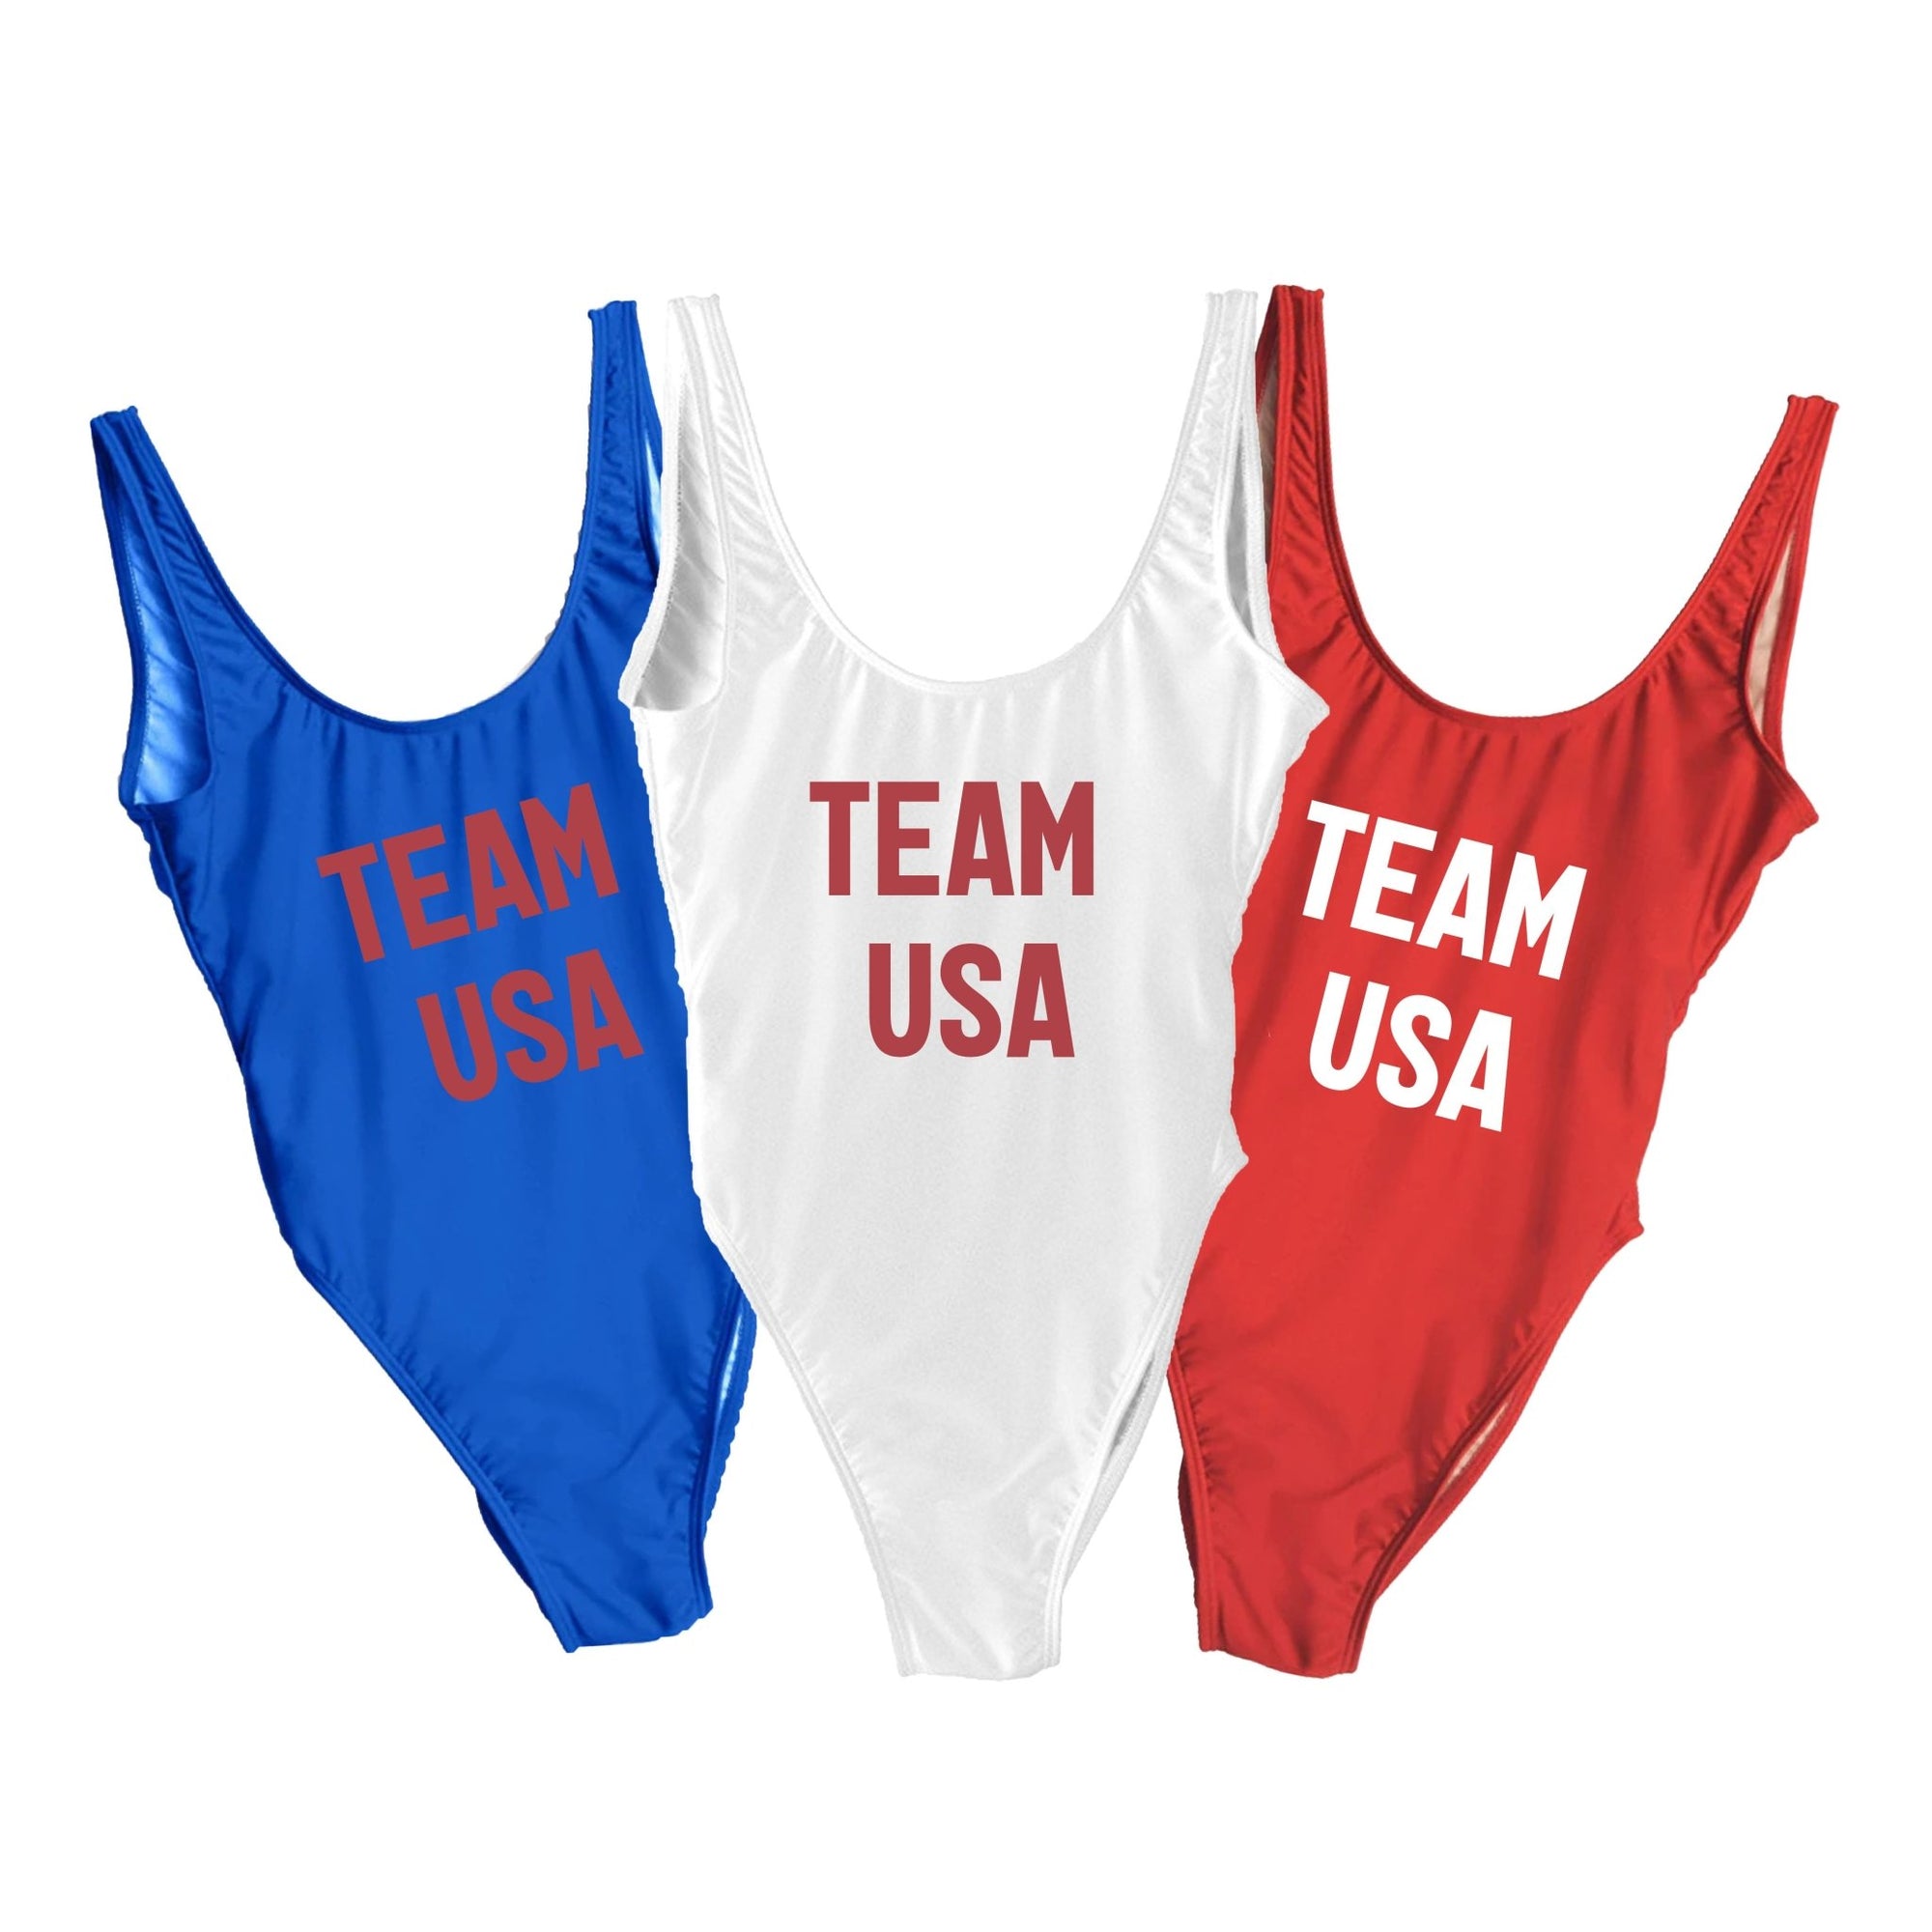 Red, white, and blue swimsuits that read "Team USA" on the front